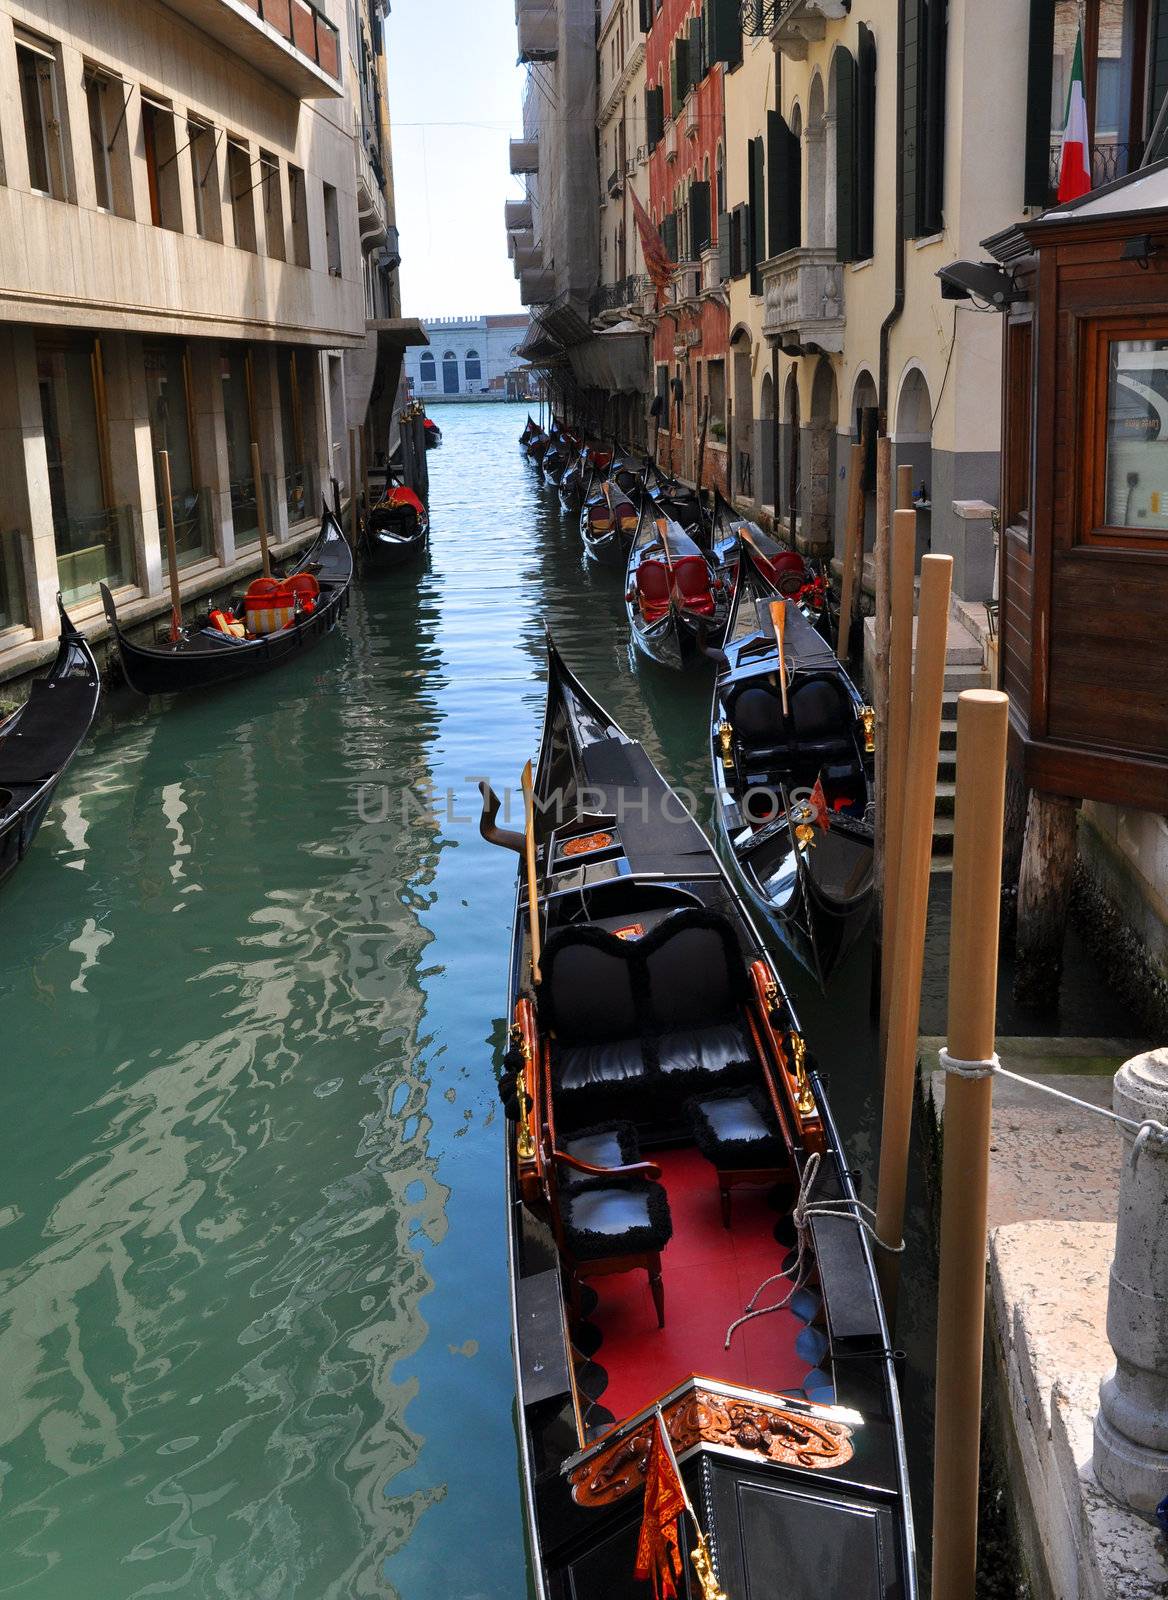 A typical water channel named Rio wih gondole - Venezia - Italy